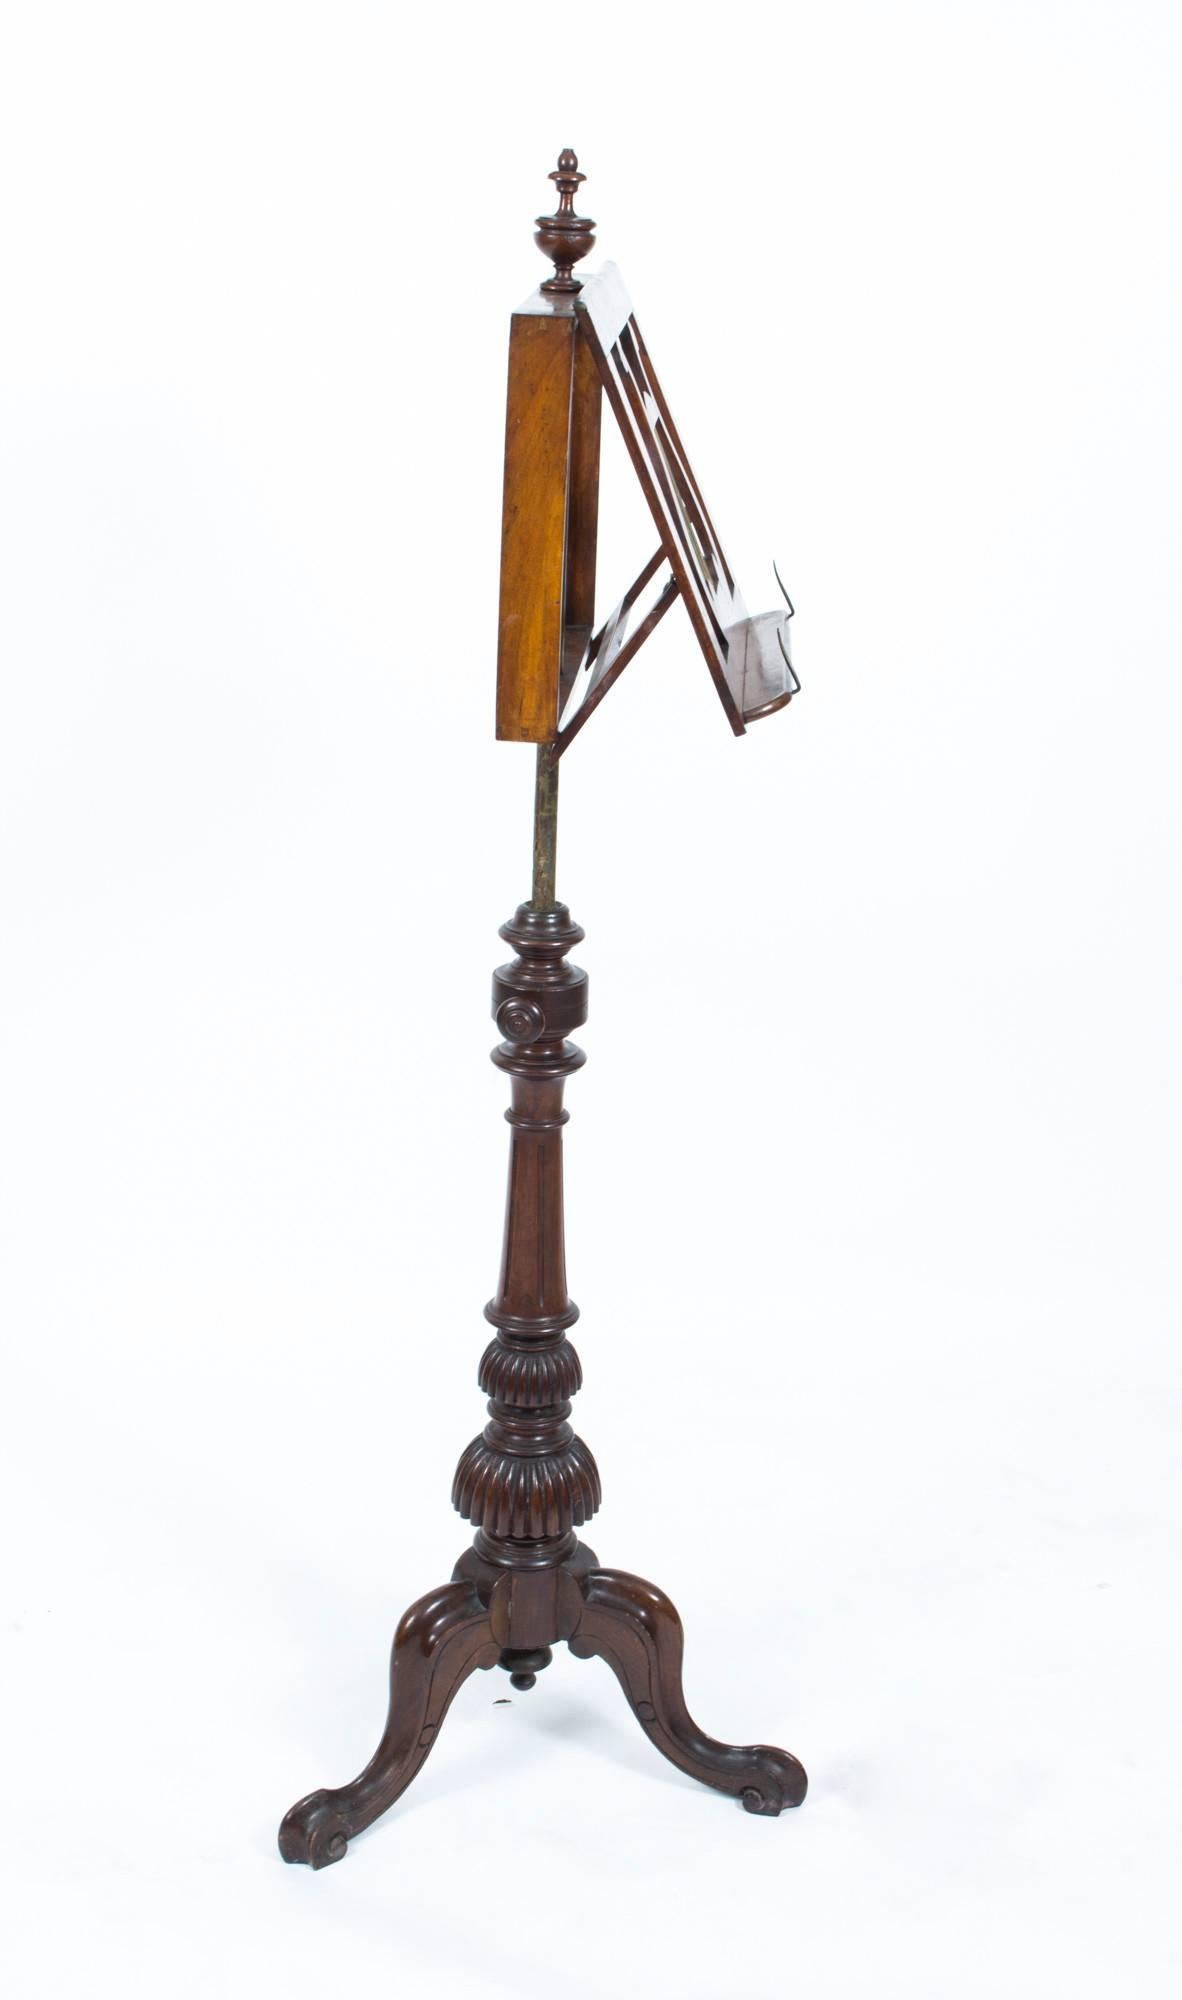 
Description: This handsome antique walnut and mahogany Victorian tripod music stand, is circa 1860 in date. 

It has been masterfully crafted with an adjustable book rest with a decorative lyre and a central turned finial, which can be raised or